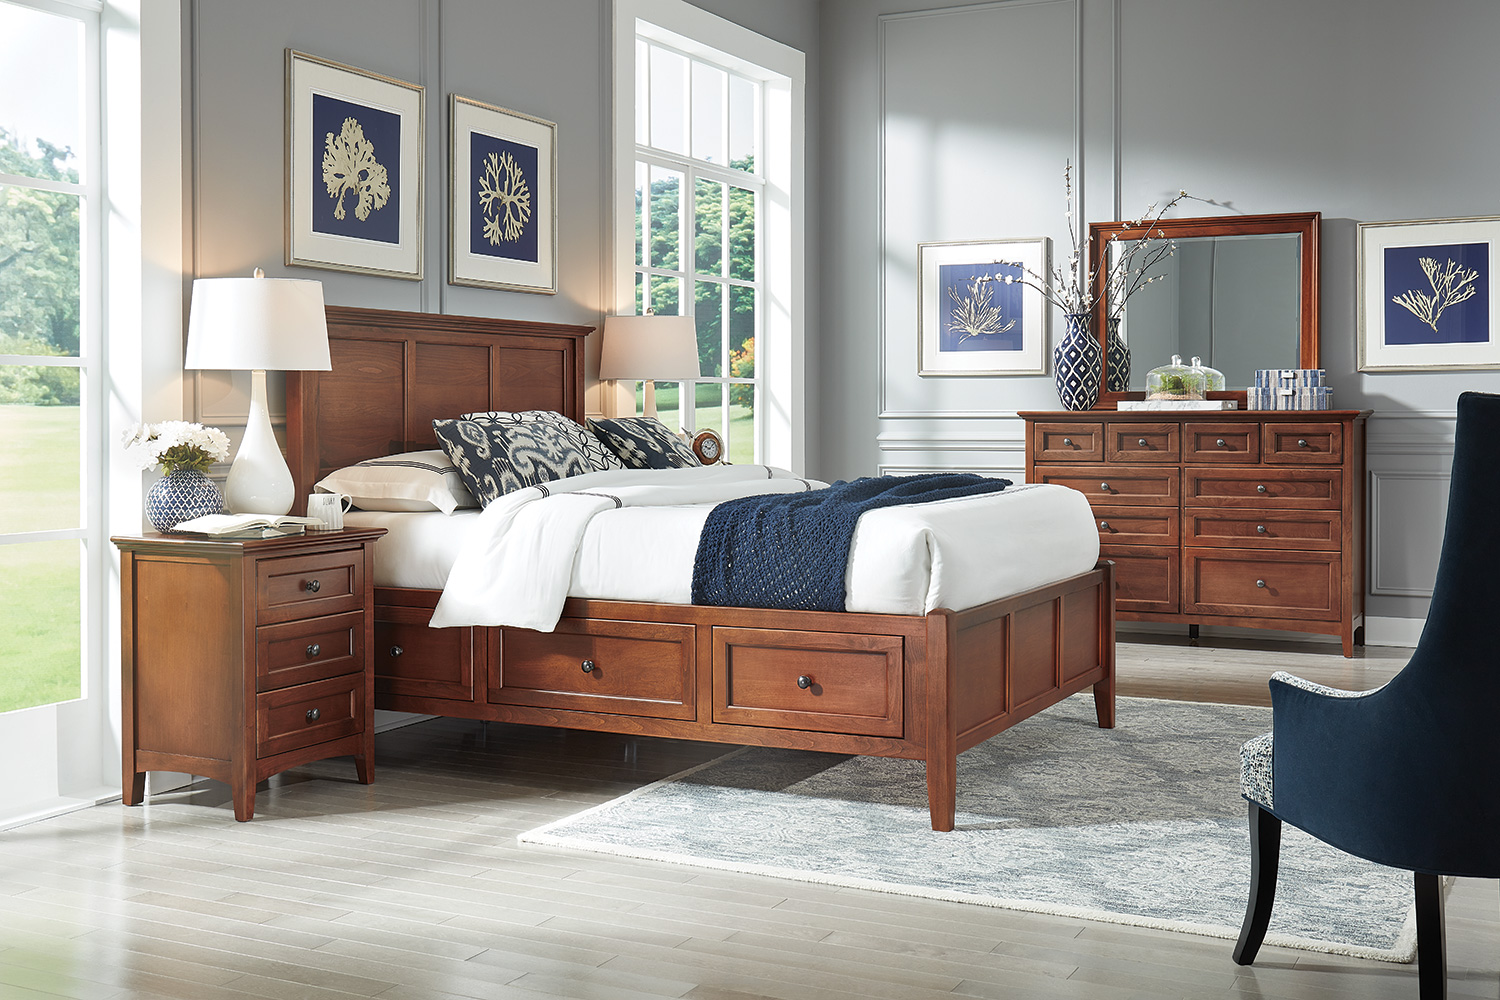 A bedroom with a cherry wood bed and dresser.